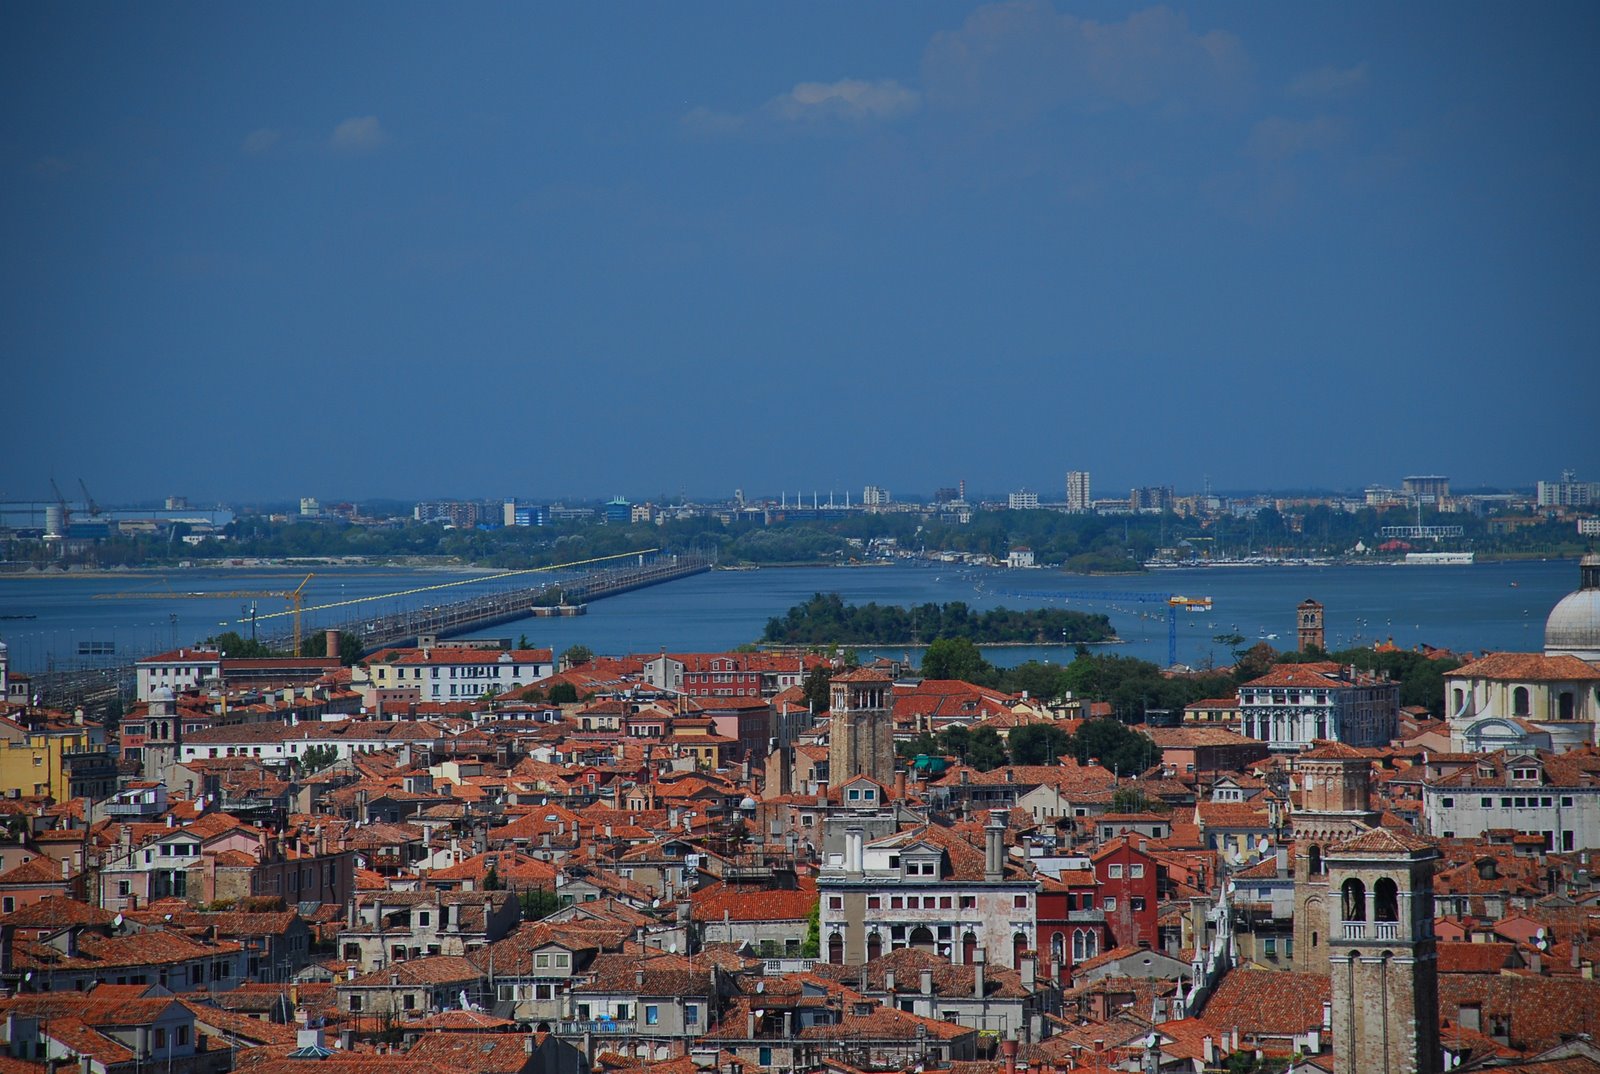 Venice, the island, the mainland and the lagoon